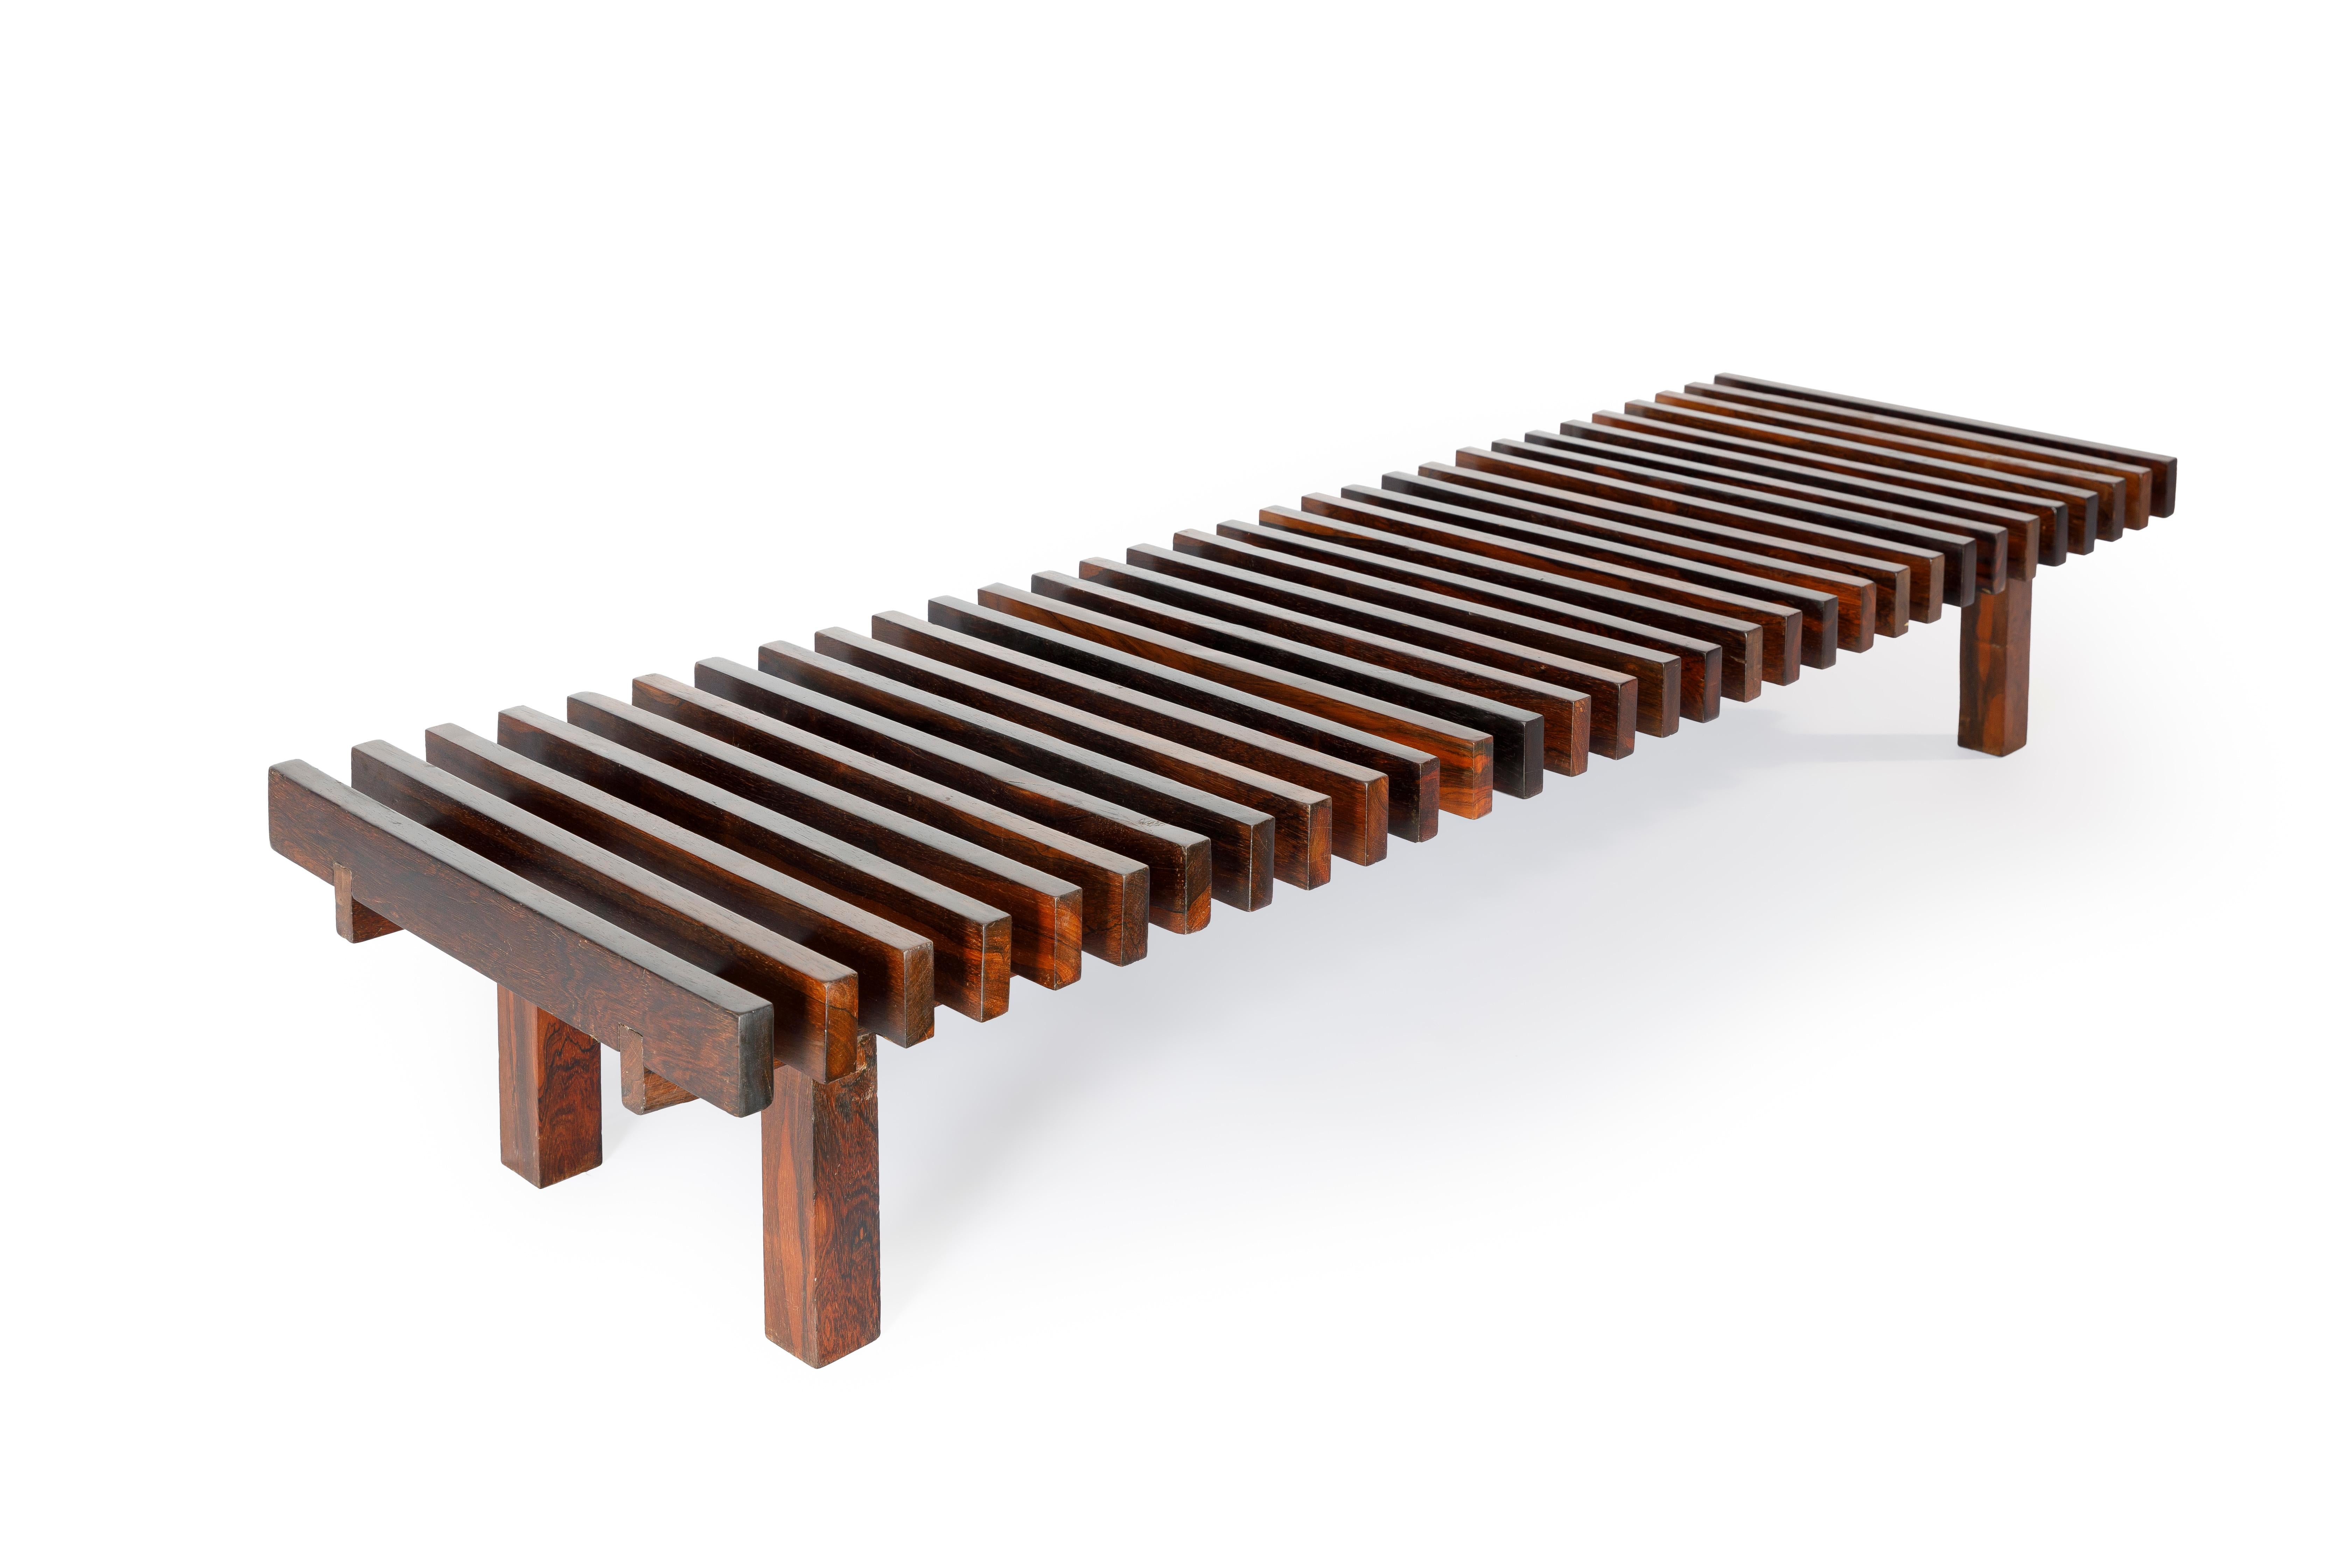 Brazilian Mid-Century Modern Slatted Bench from Forma Manufacture, Brazil, 1970s For Sale